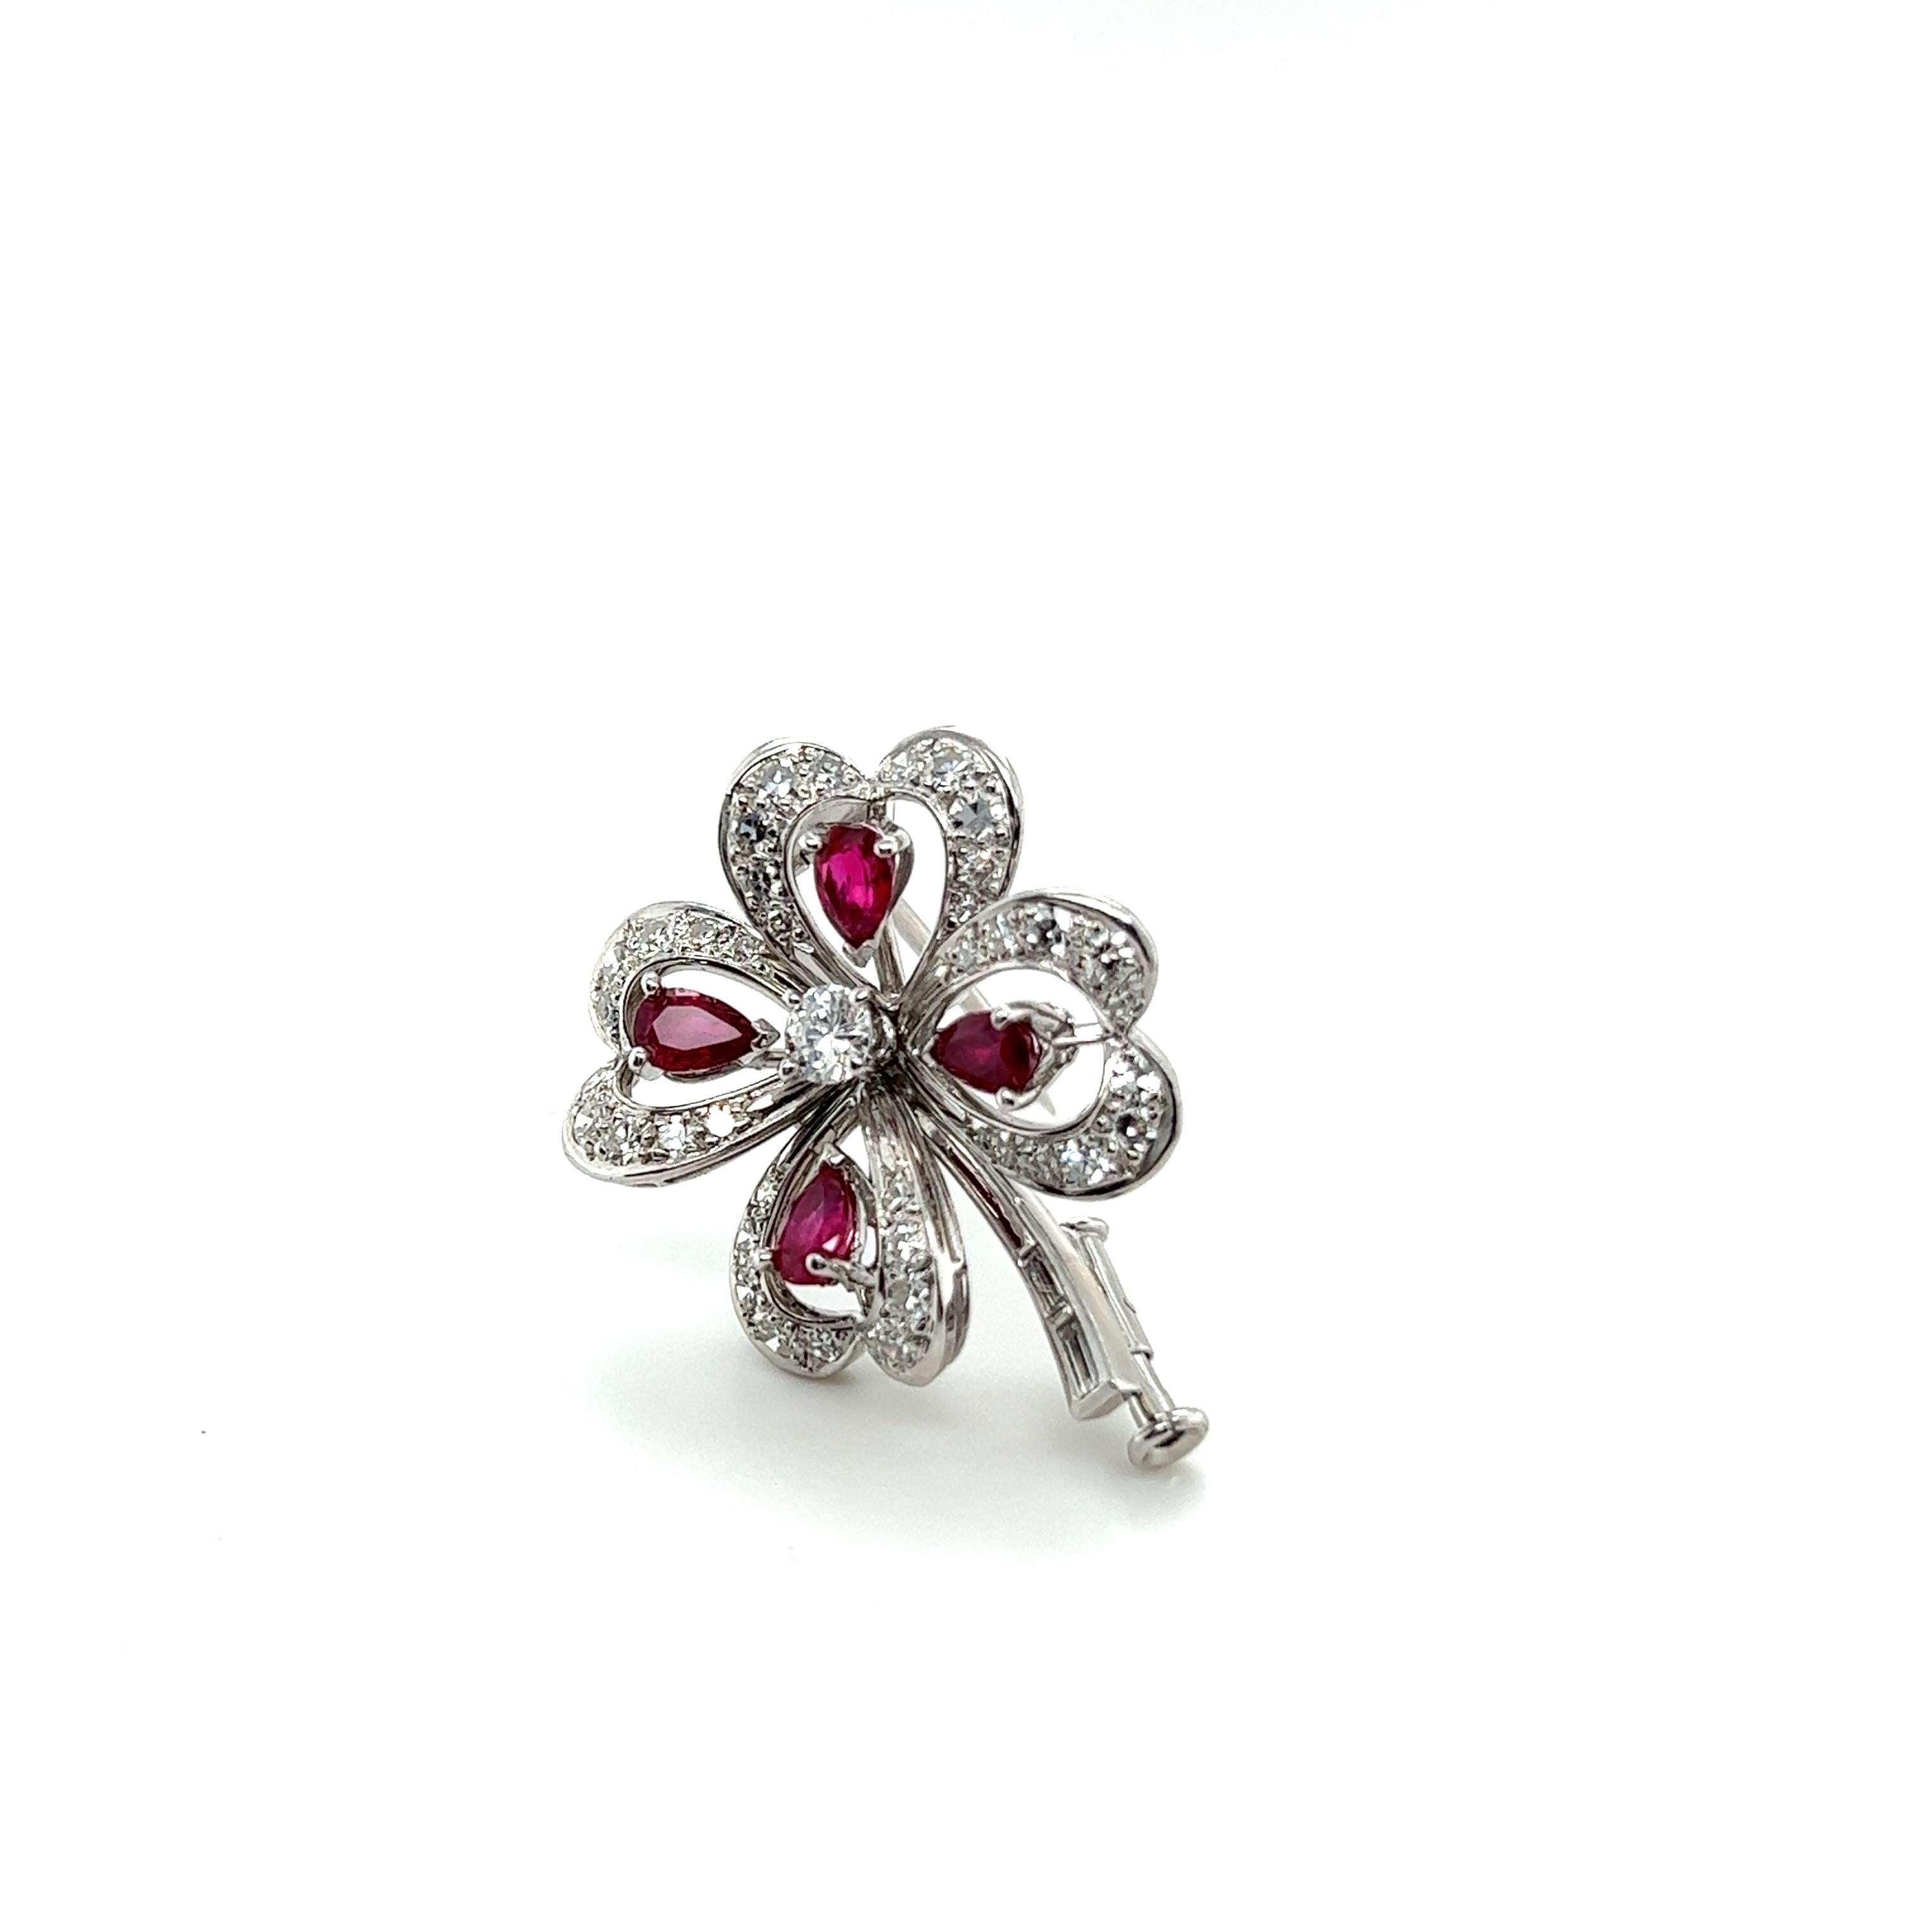 Pear Cut Clover Brooch with Rubies & Diamonds in 18 Karat White Gold by Meister